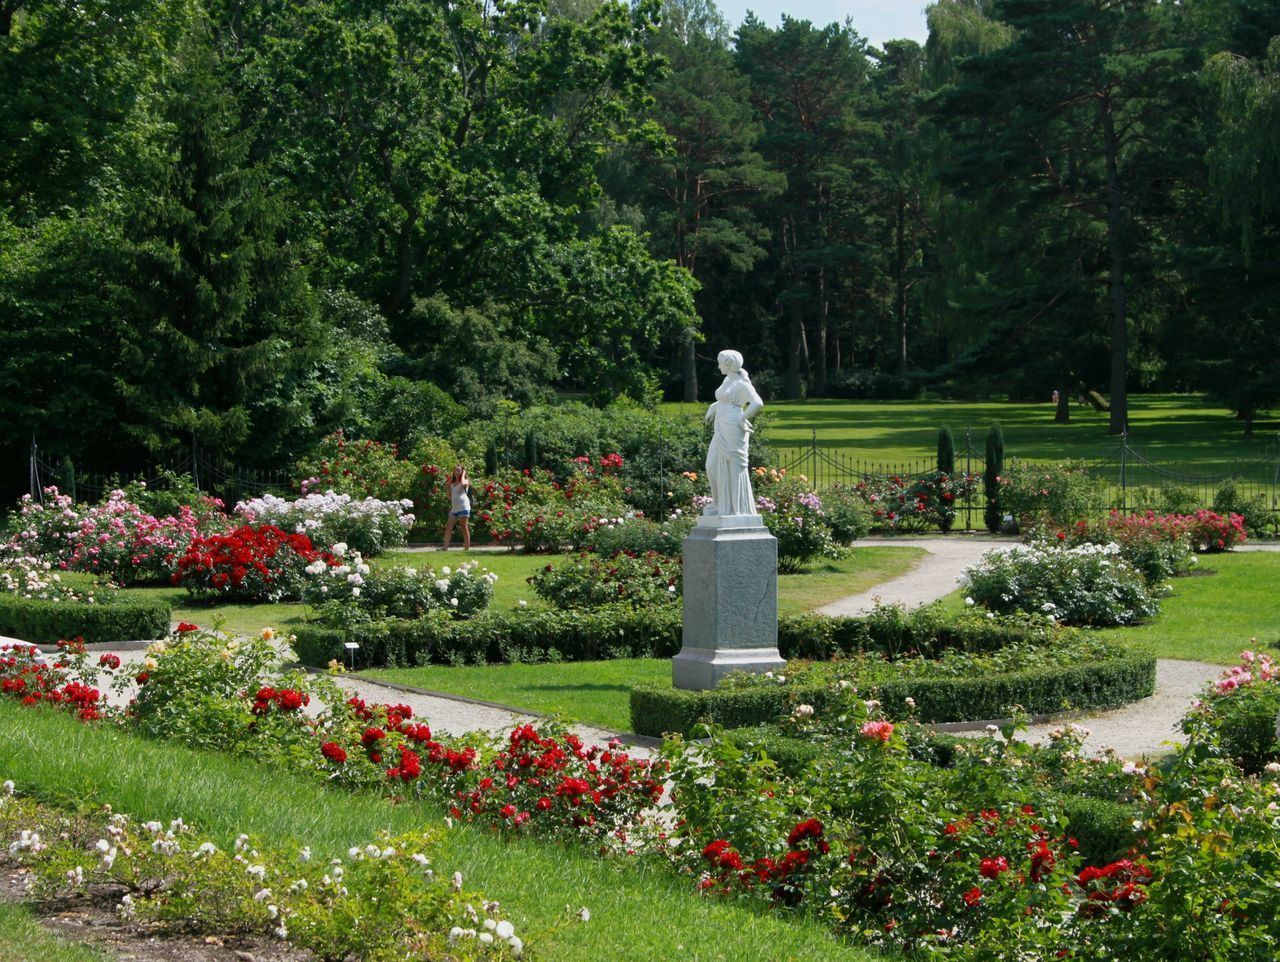 STATUE IN PARK AGAINST TREES